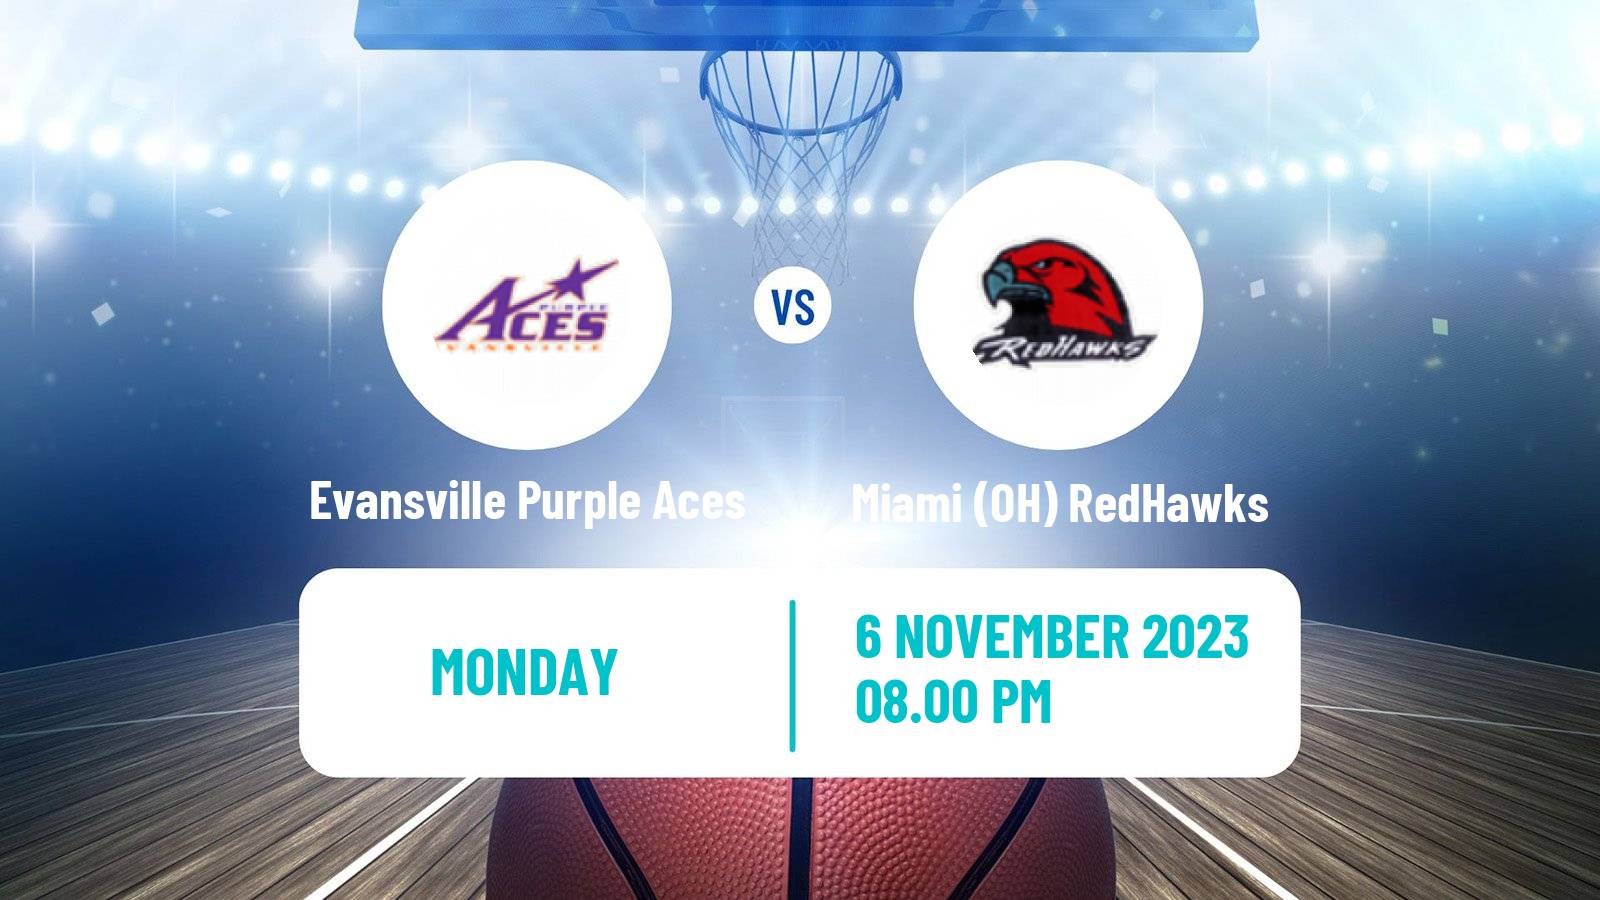 Basketball NCAA College Basketball Evansville Purple Aces - Miami (OH) RedHawks